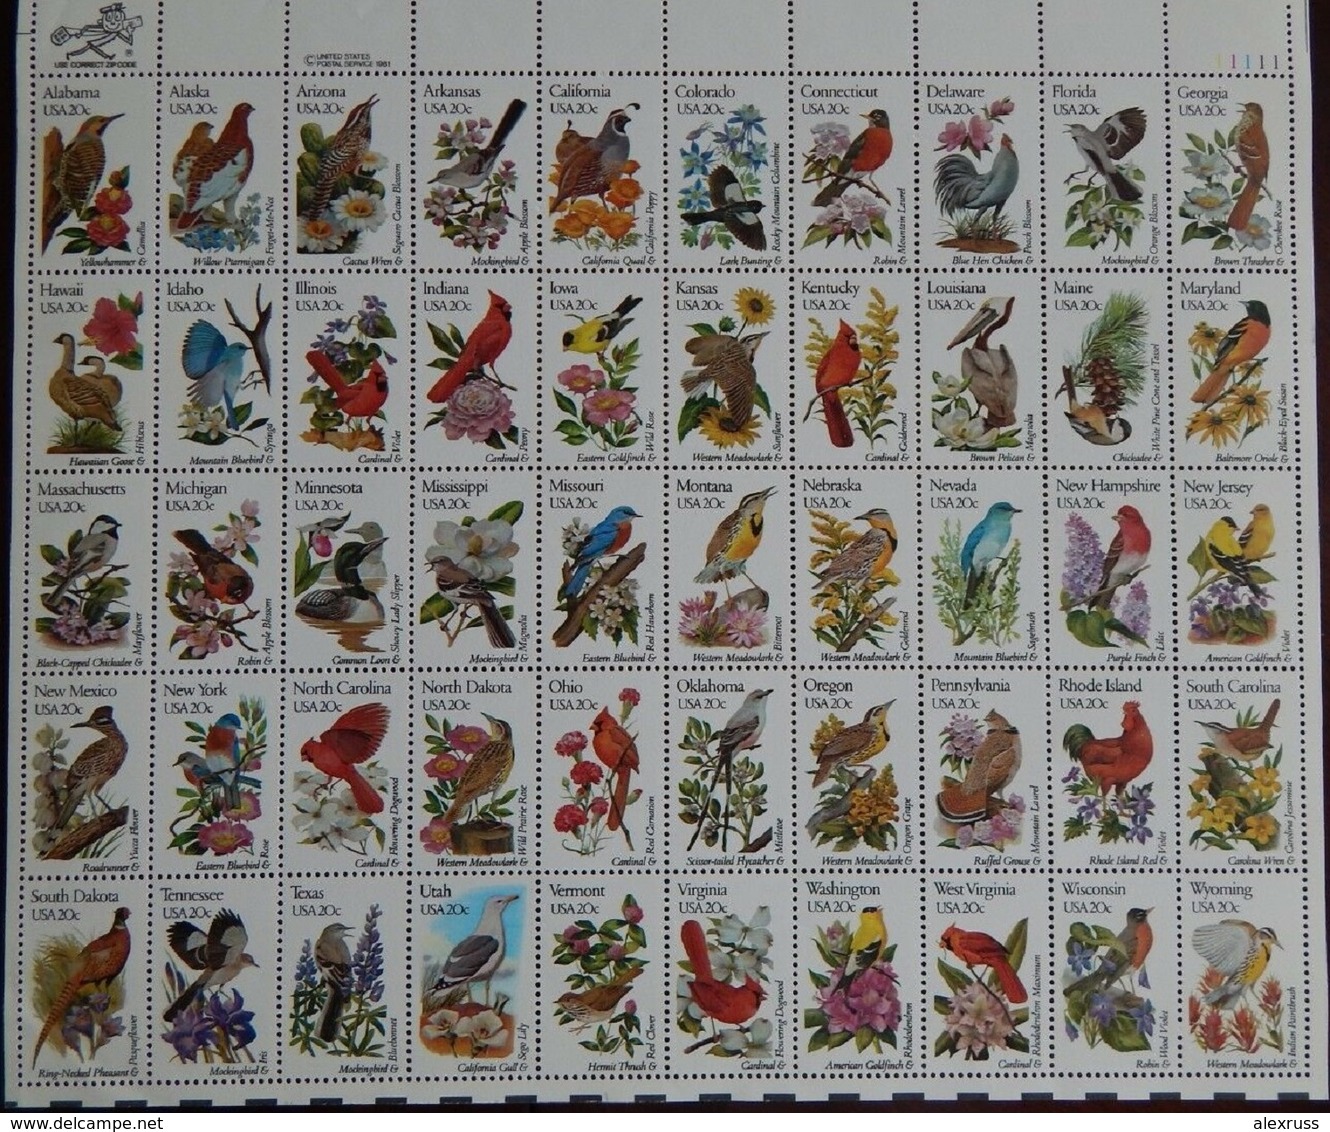 US 1982 Large Sheet,State Birds & Flowers 50 Stamps 20¢ Scott # 1953-2002,VF MNH** - Sheets